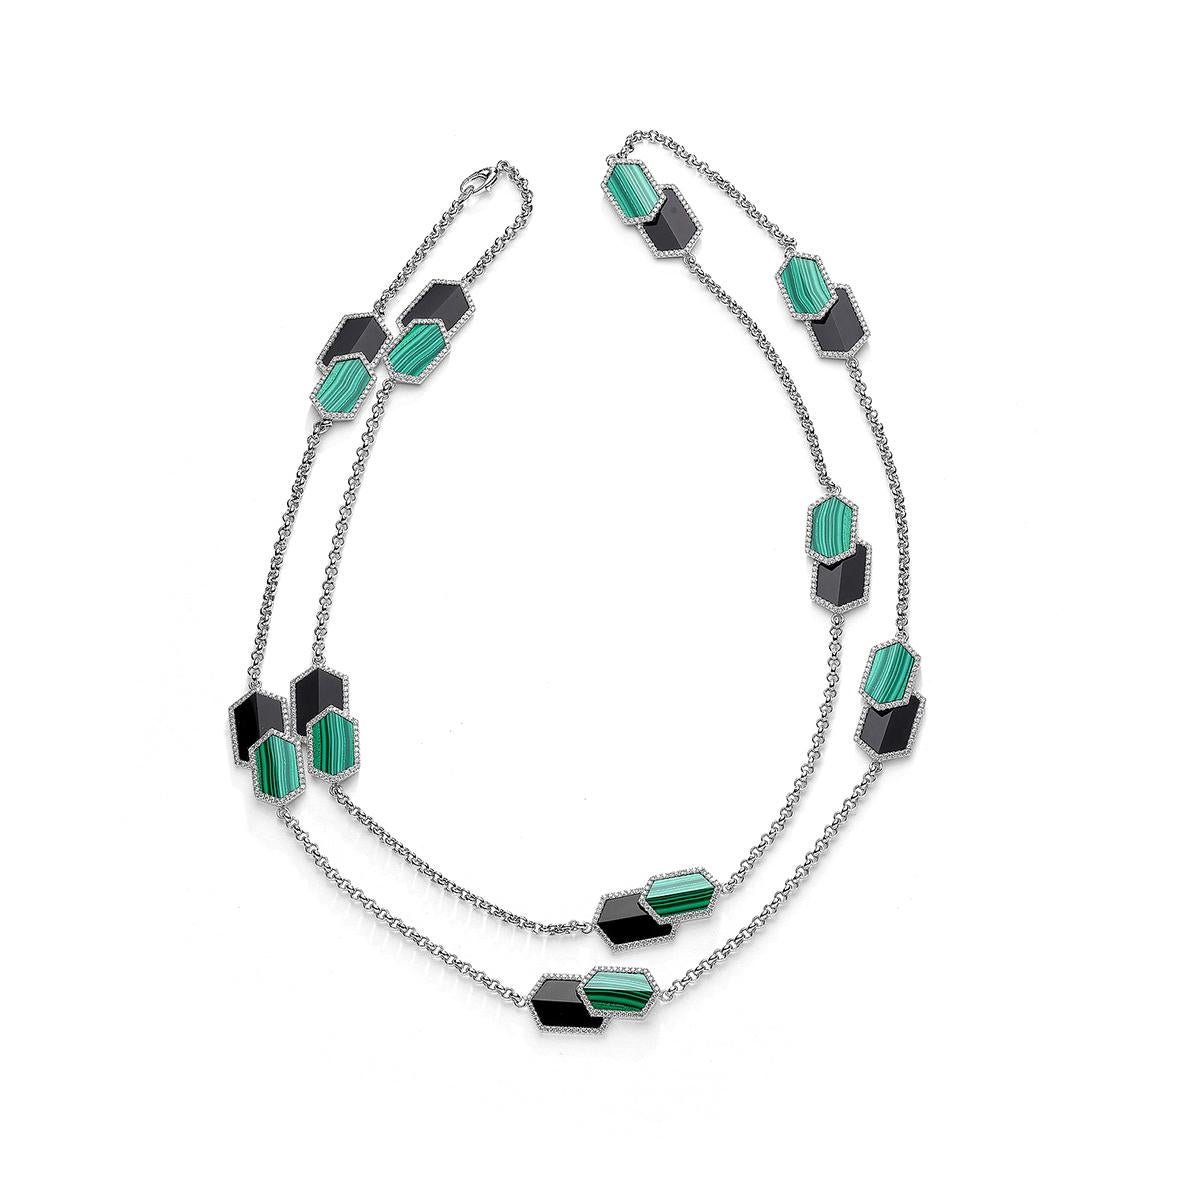 Necklace in 18kt white gold set with 640 diamonds 4.84 cts, 10 onyx 23.83 cts and 10 malachites 60.78 cts